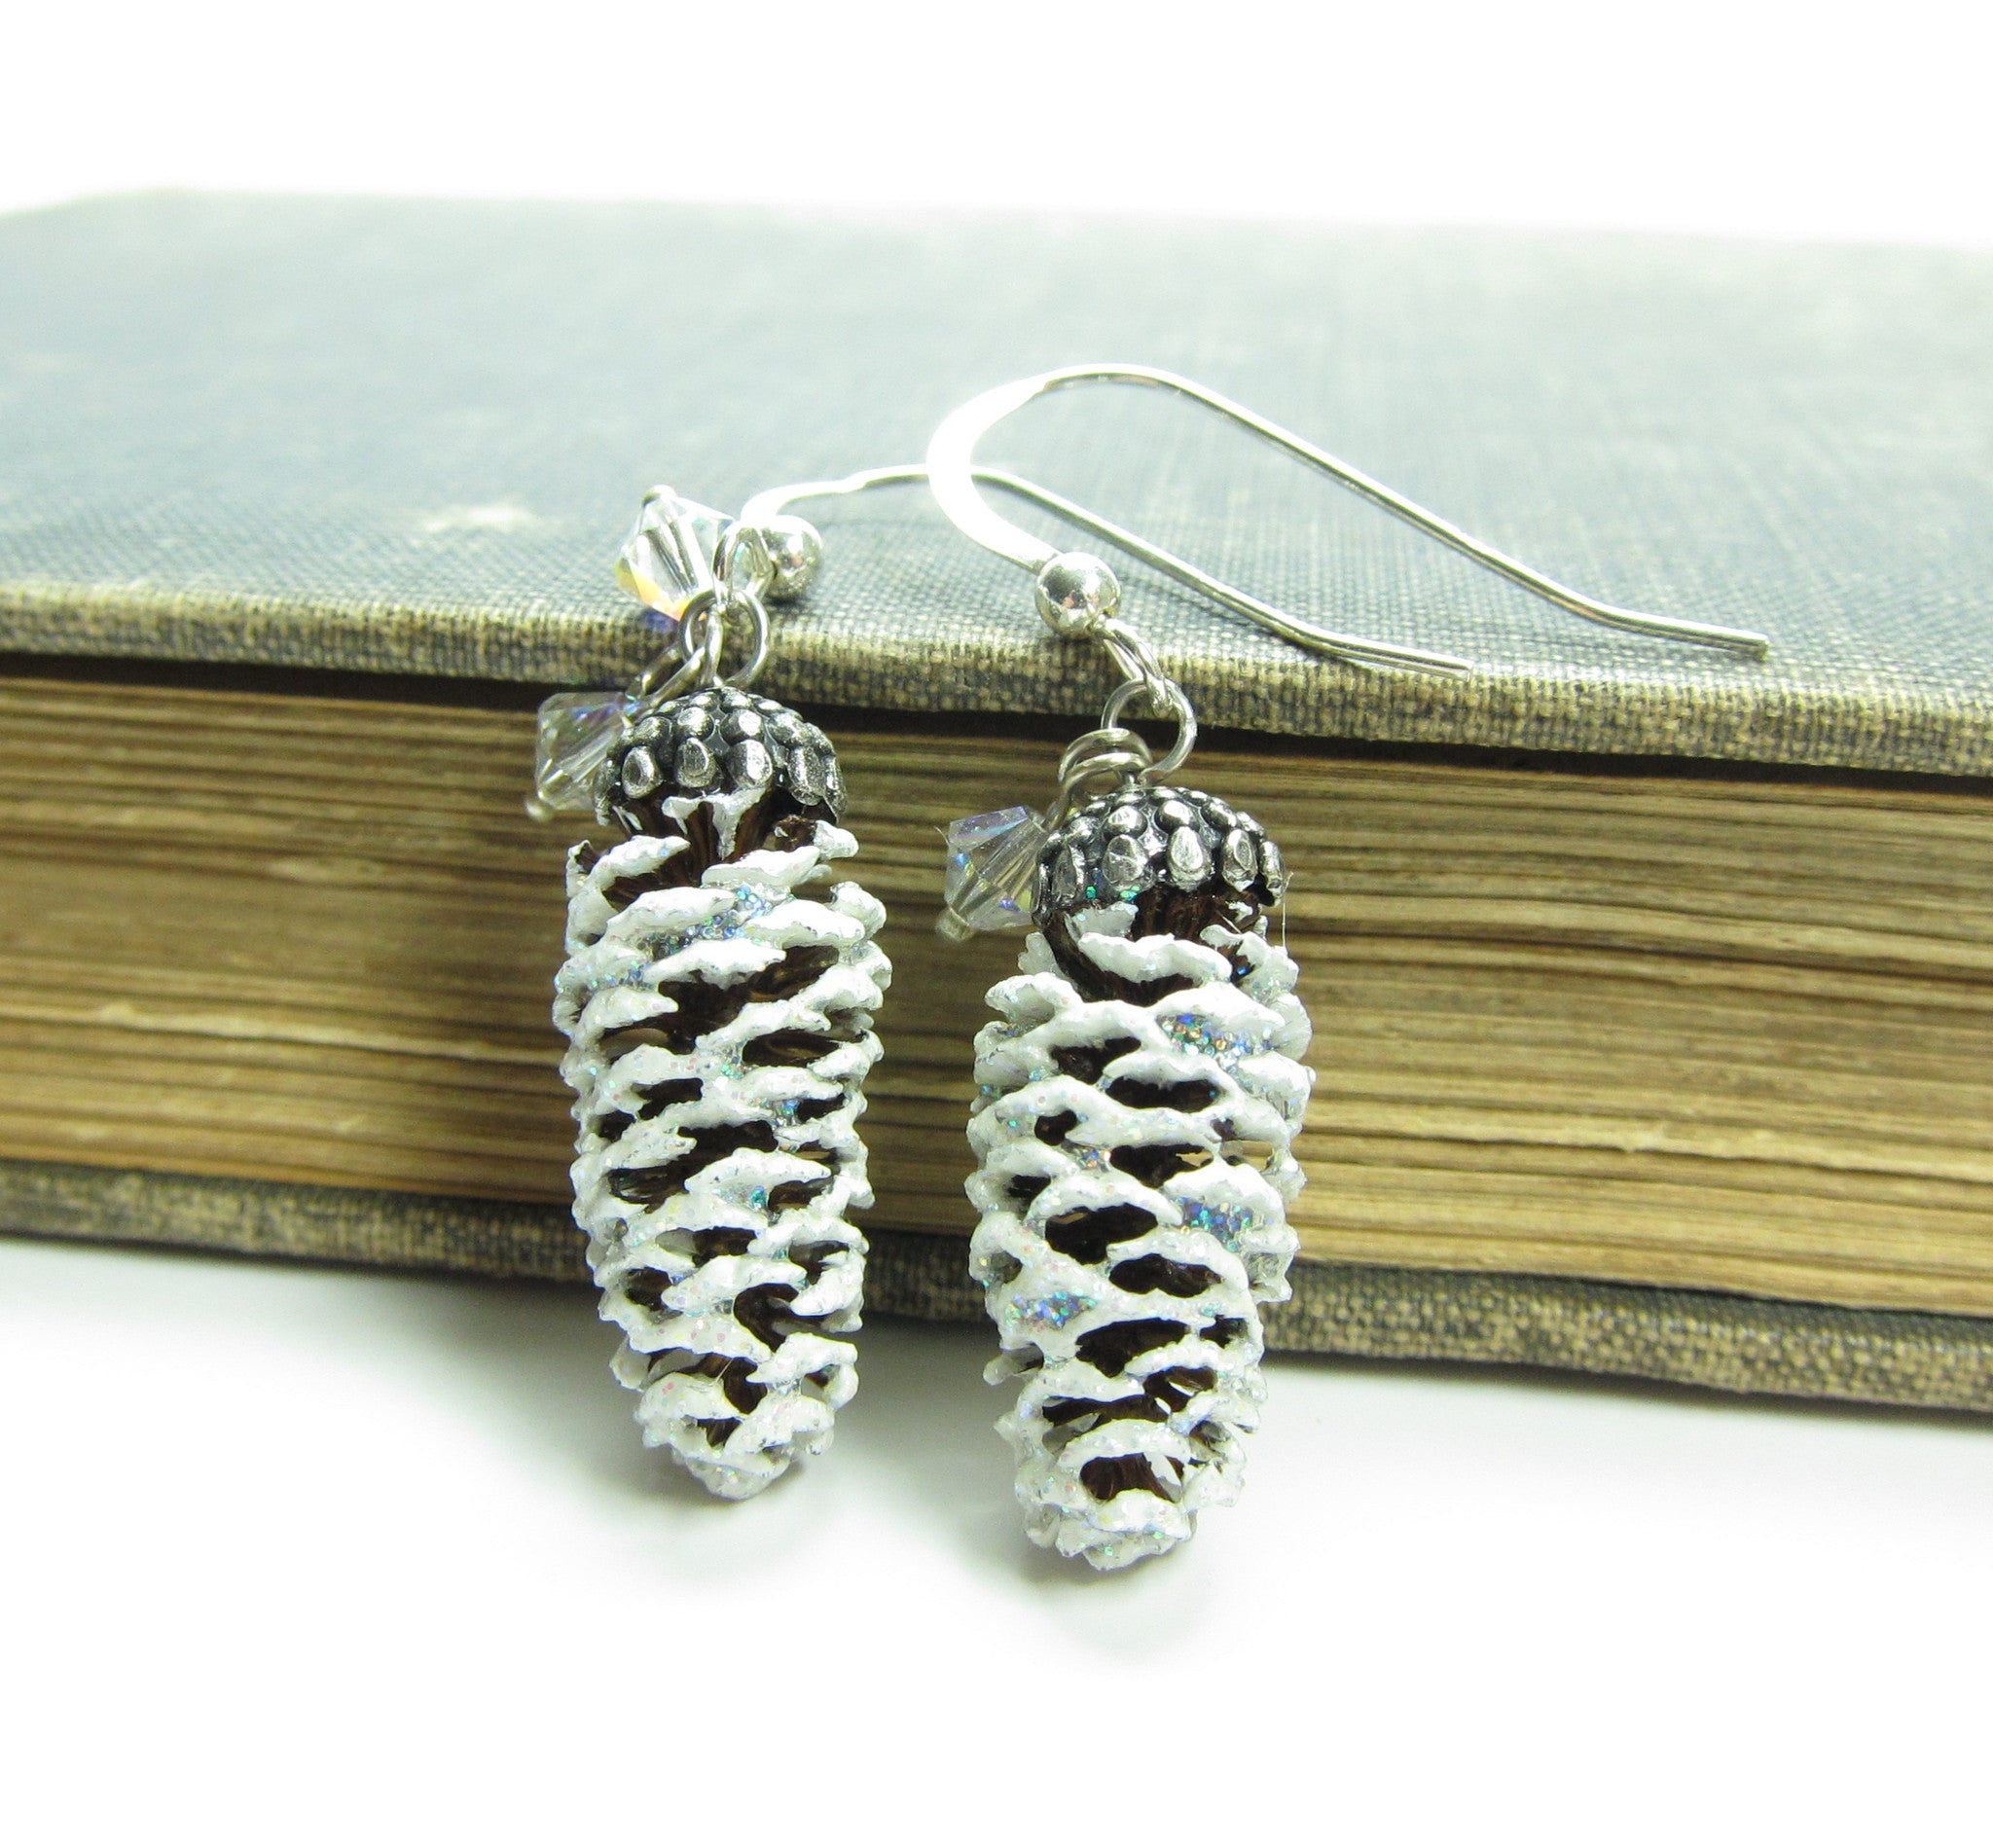 Pine Cone Earrings on Sterling Silver Wires